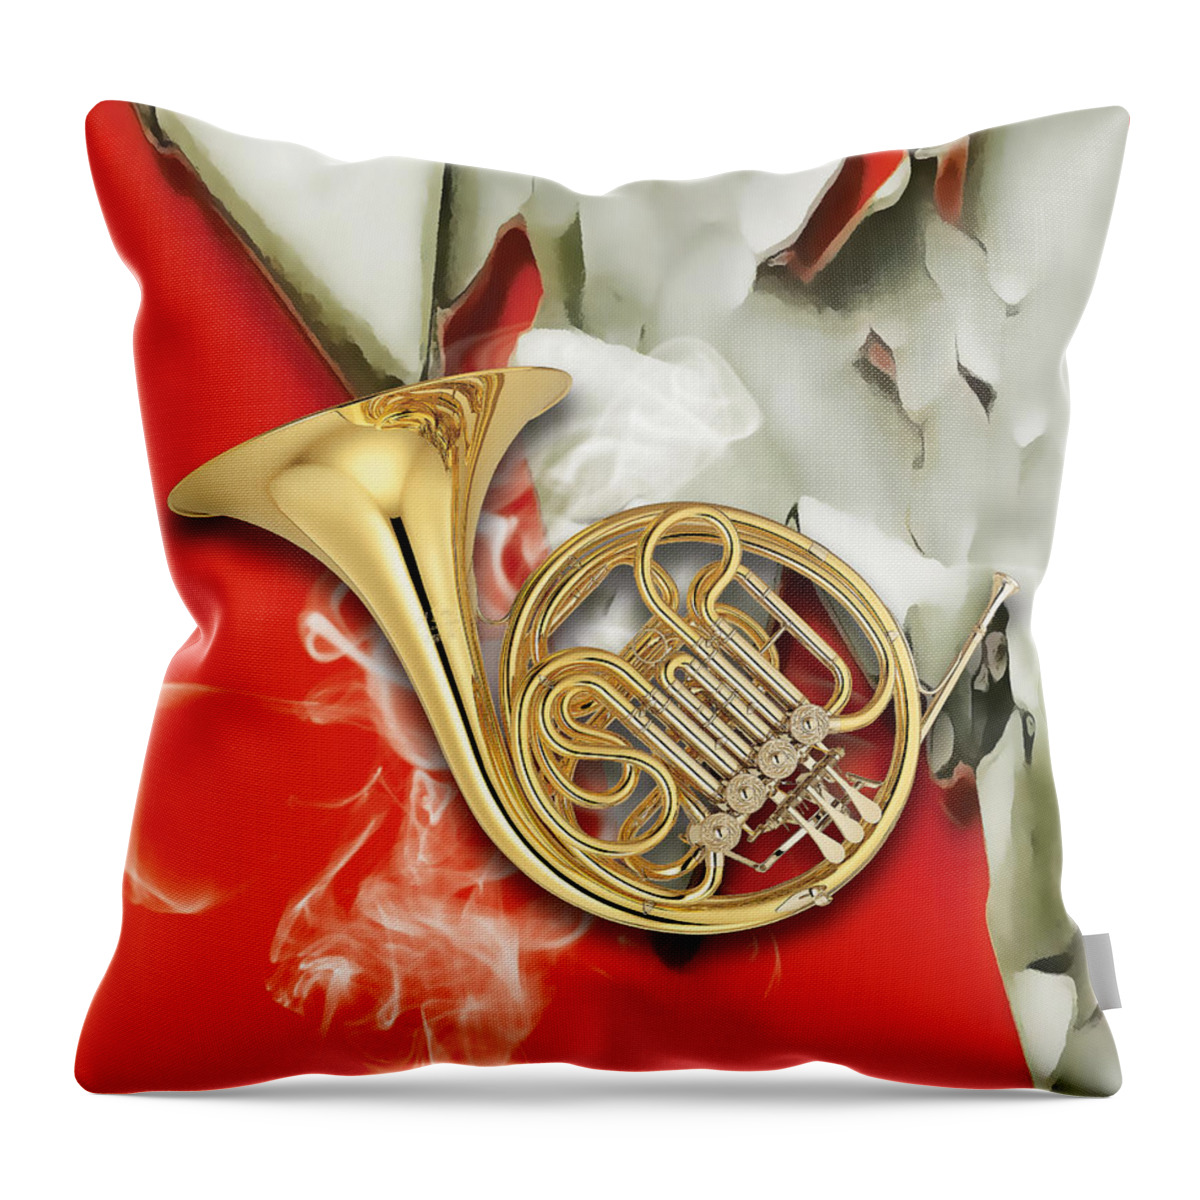 French Horn Throw Pillow featuring the mixed media French Horn Section by Marvin Blaine